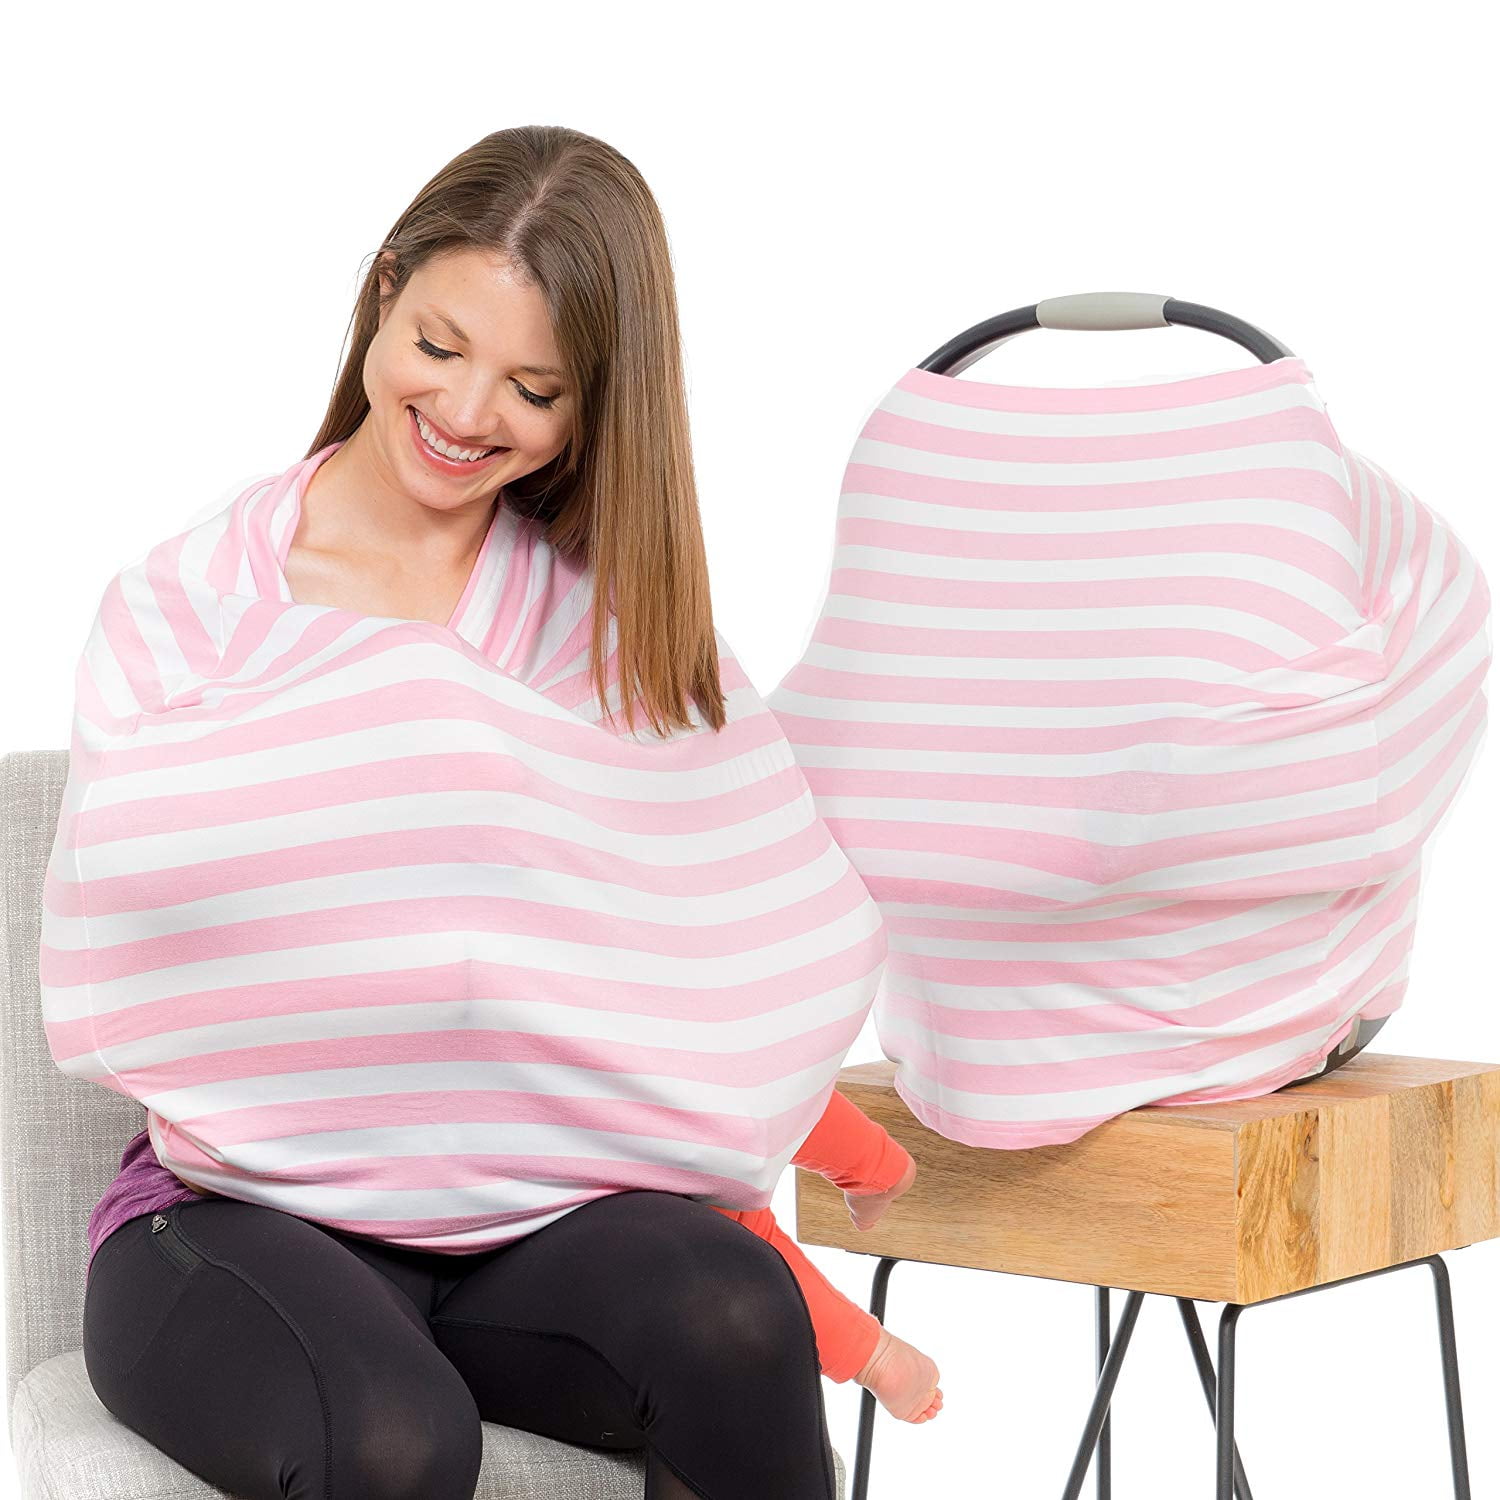 Stretchy Multi Use Car Seat Canopy Carseat Canopy Nursing Breastfeeding Cover 